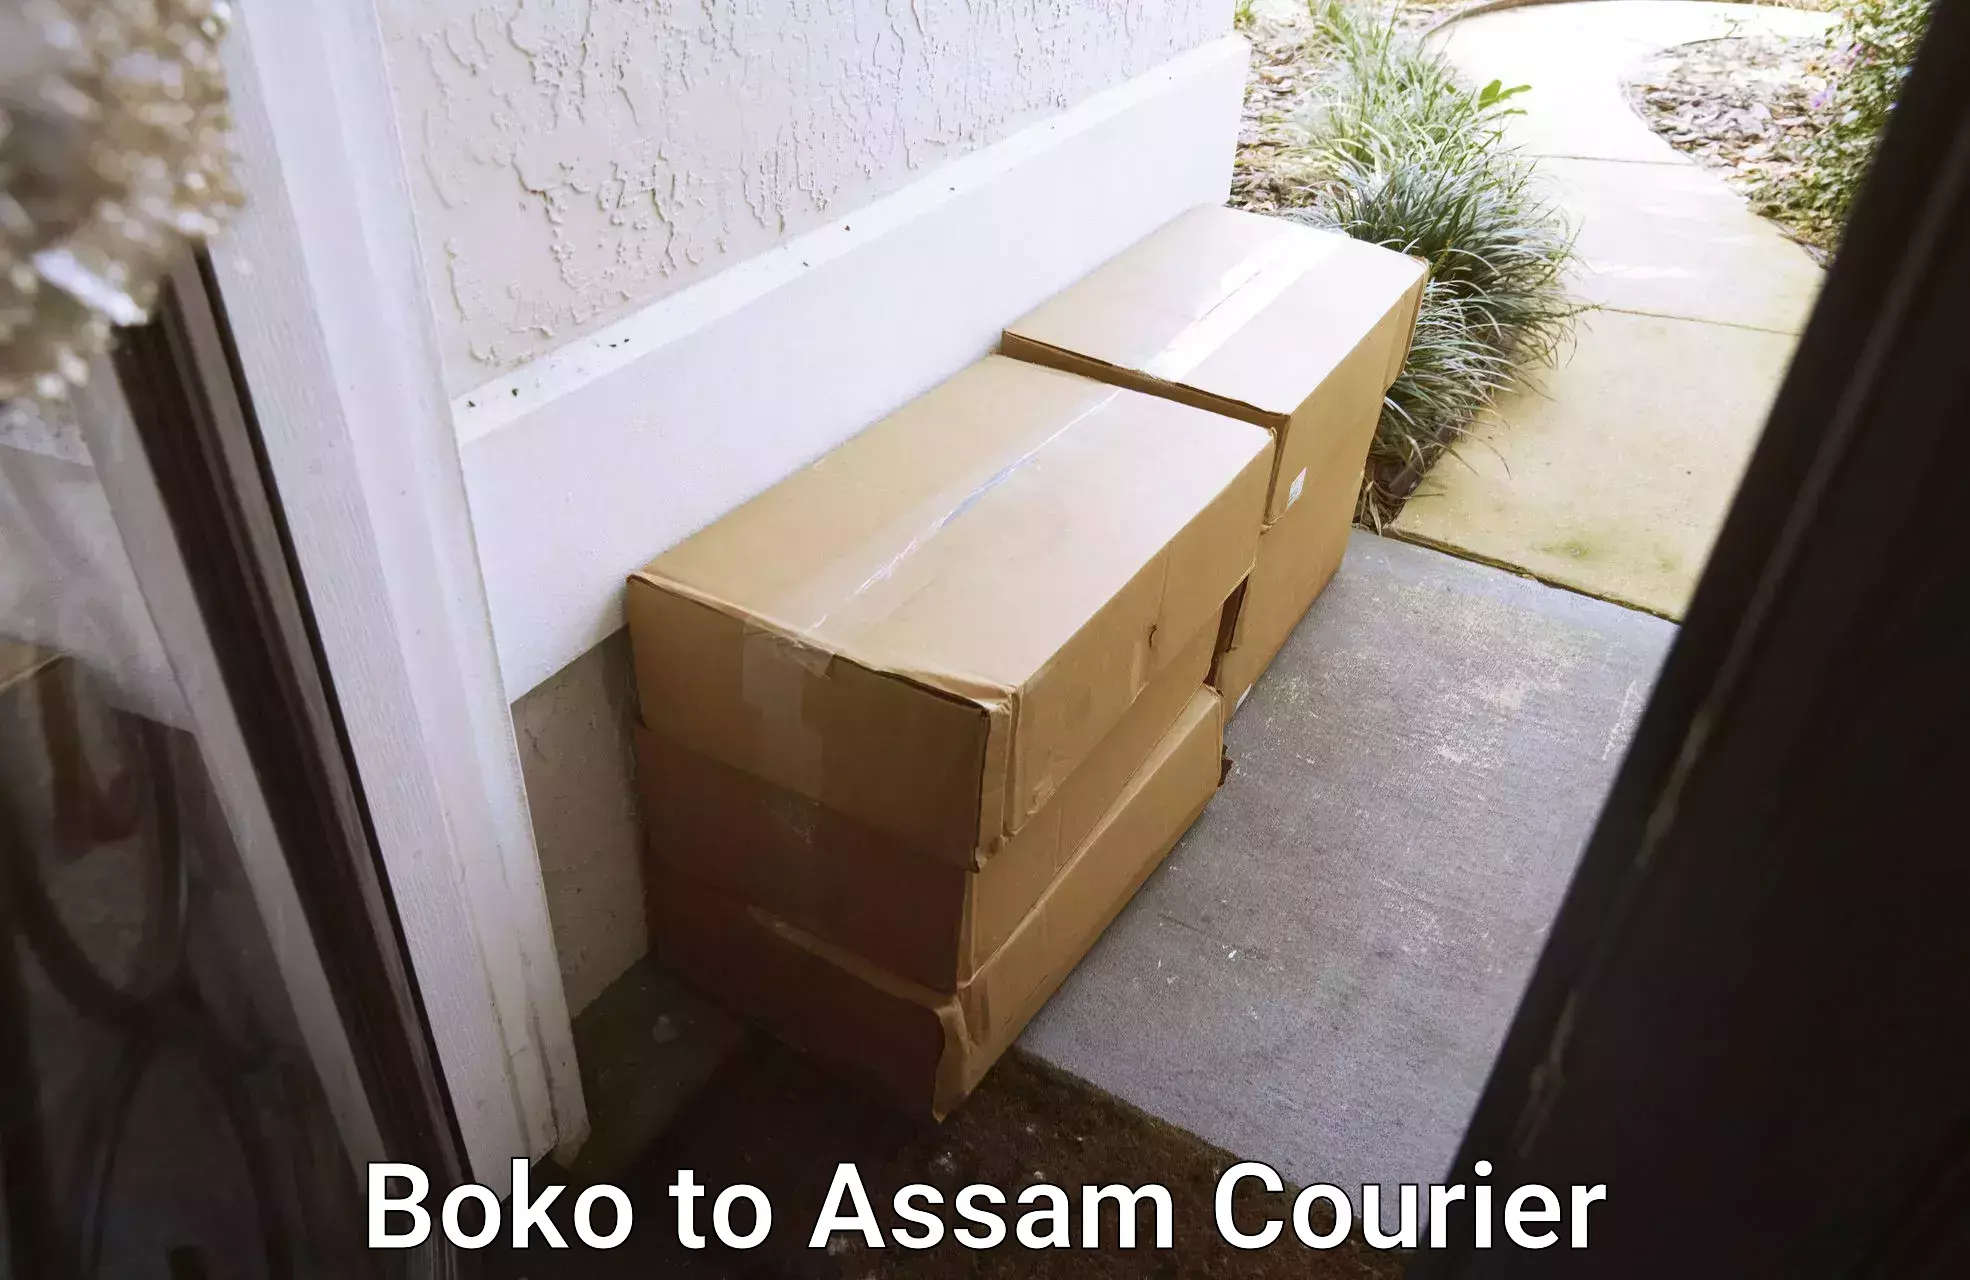 On-call courier service Boko to Assam